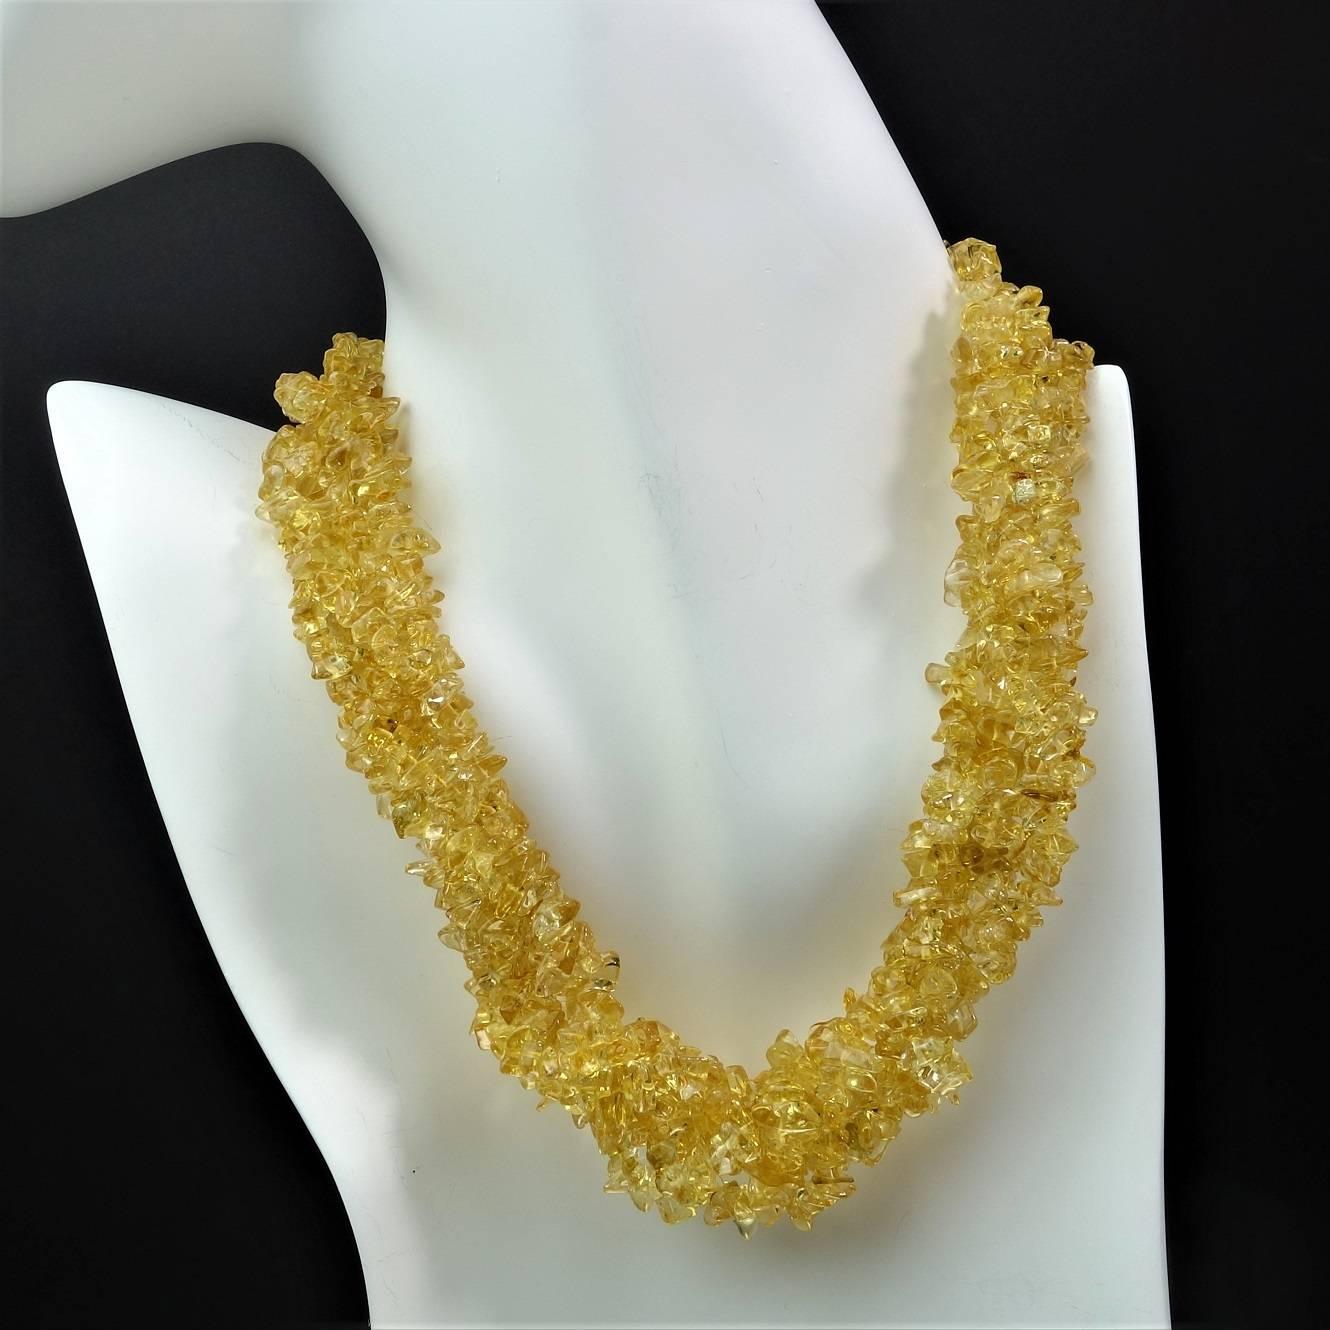 Necklace of Polished Chips of Bright Citrine in Four Continuous 35 Inch Strands. Look at all the different ways you can wear this gorgeous Citrine necklace: Wrap it into eight strands and wear as a choker, tie a knot in the front for a great focal,